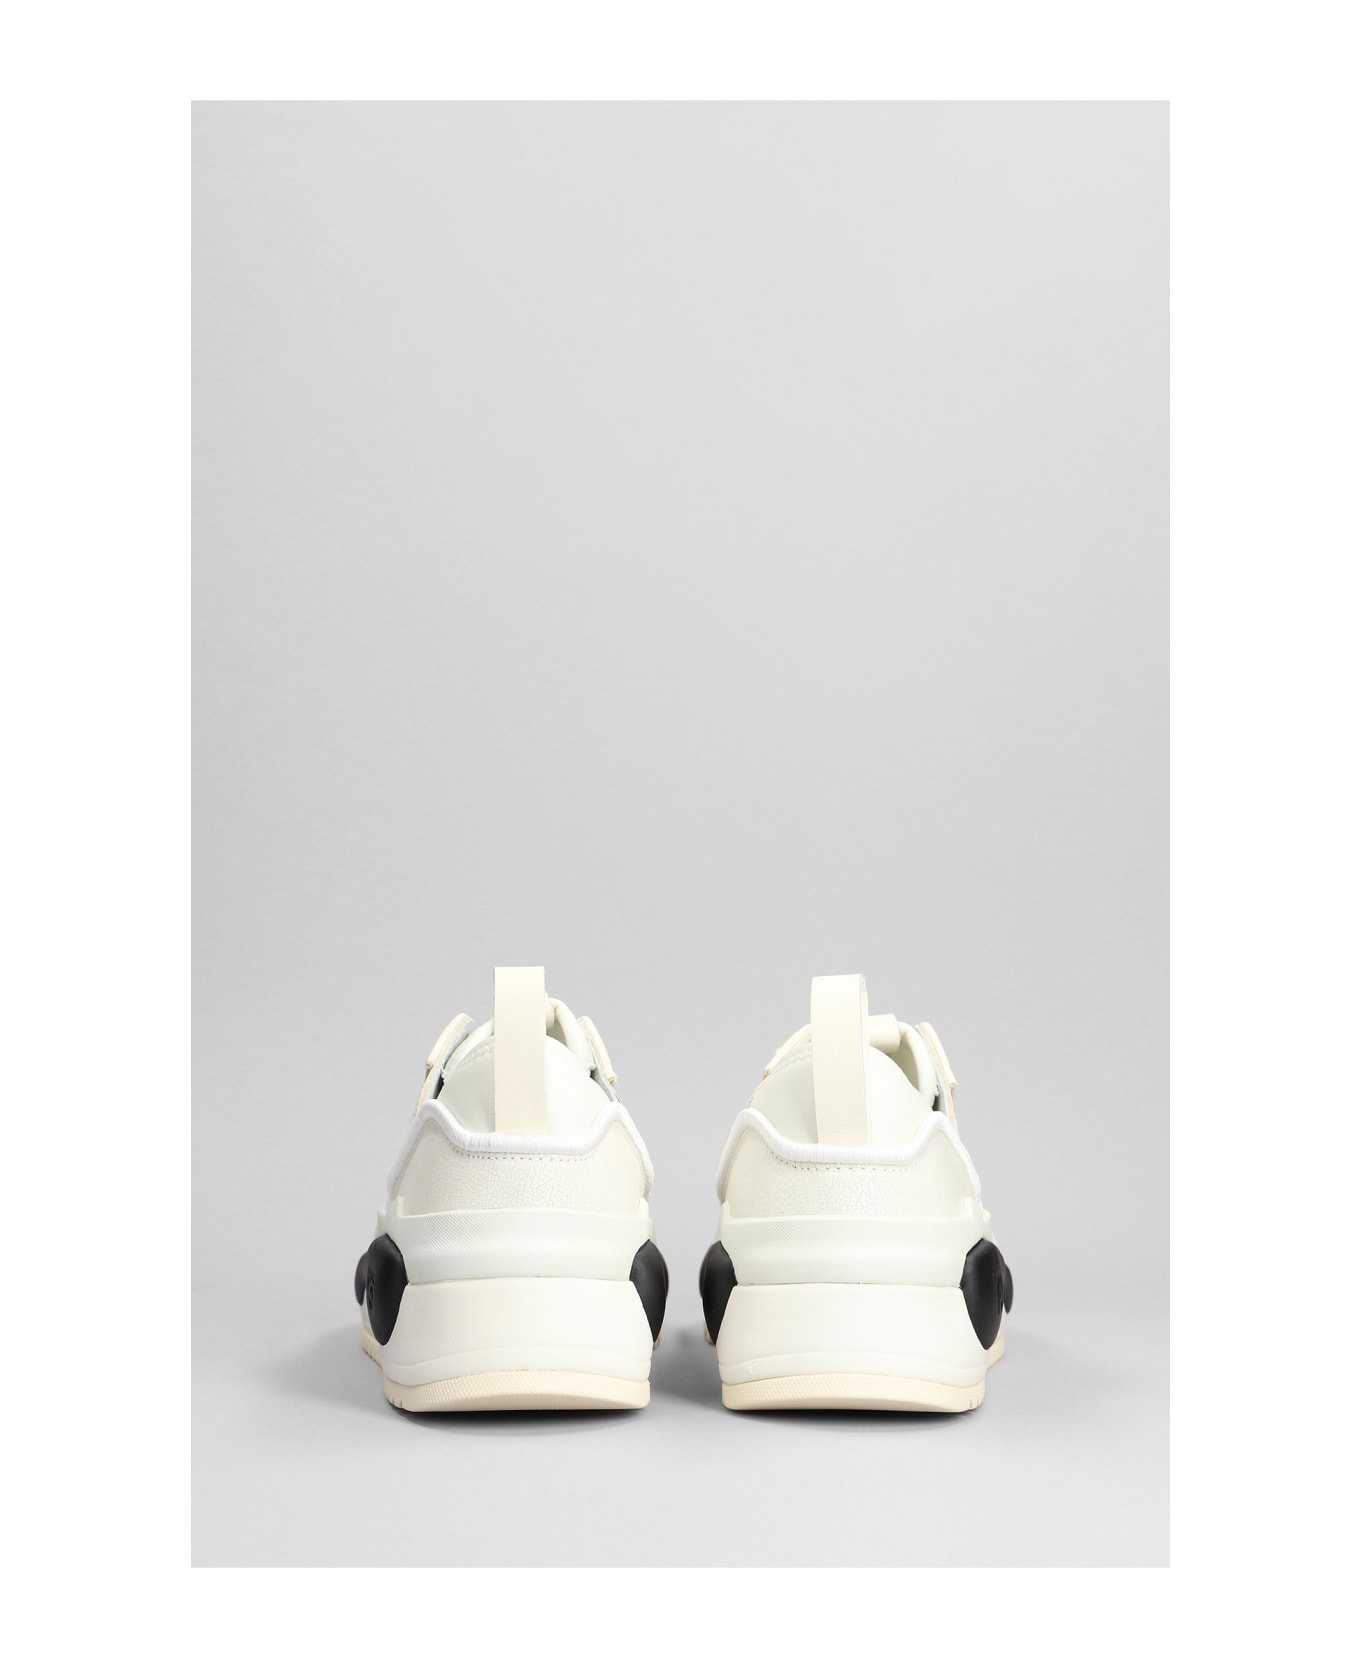 Y-3 Rivalry White Leather Sneakers - OFF WHITE WONDER WHITE (White) スニーカー